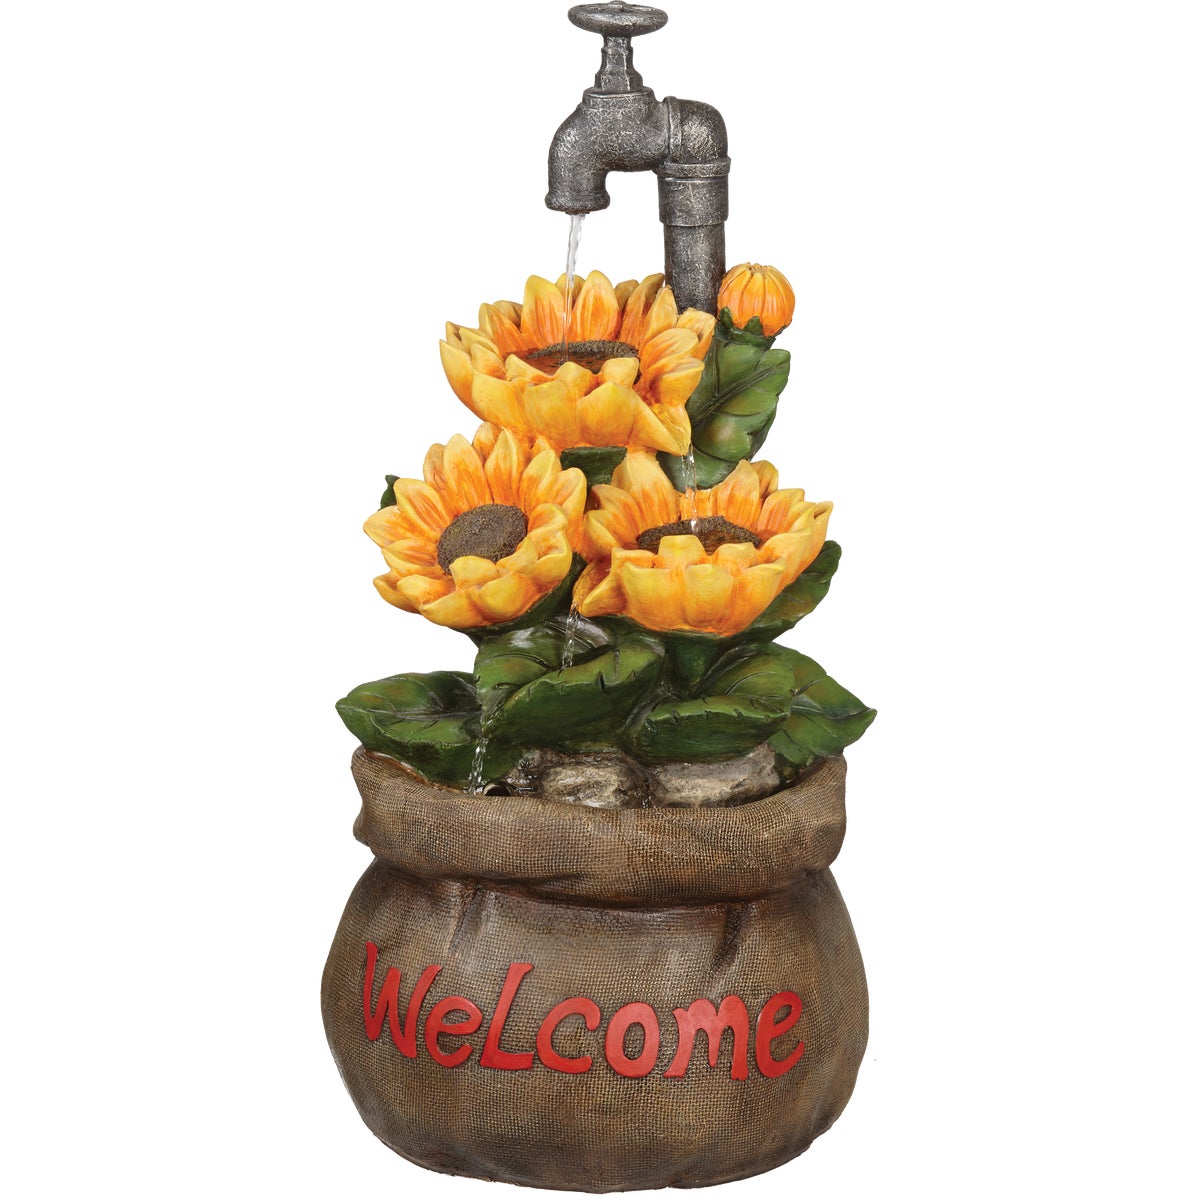 Item 802062, Durable outdoor fountain featuring a faucet pouring into a sack of 